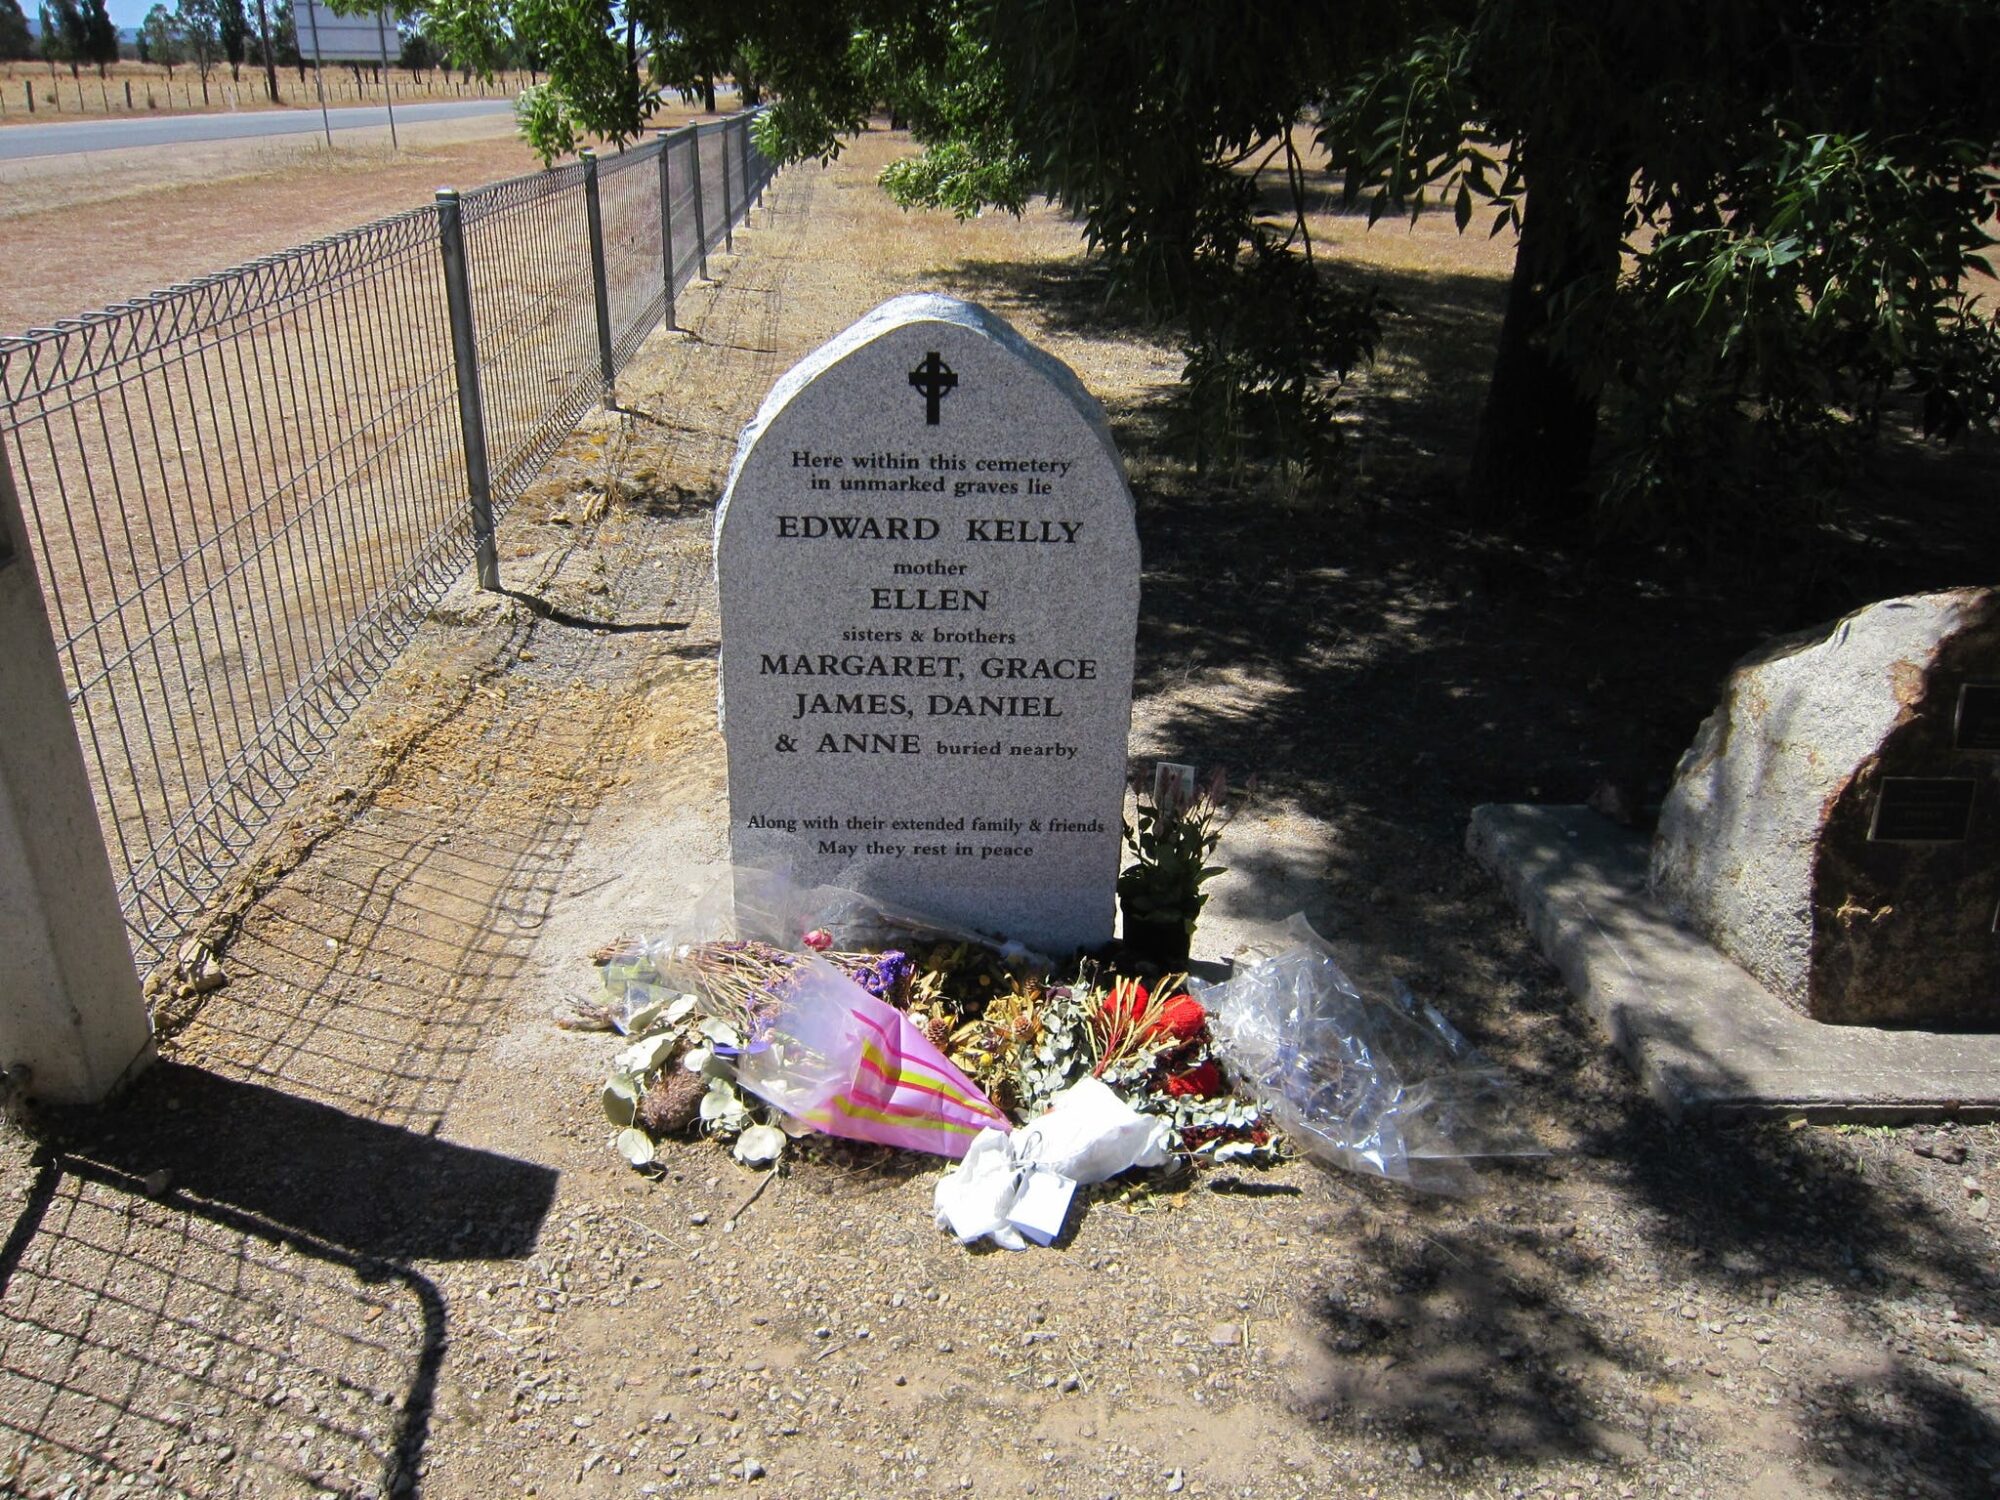 Kelly Family Headstone beside gate at entry to Greta Cemetery, flowers,  shadows, wire fence, tree